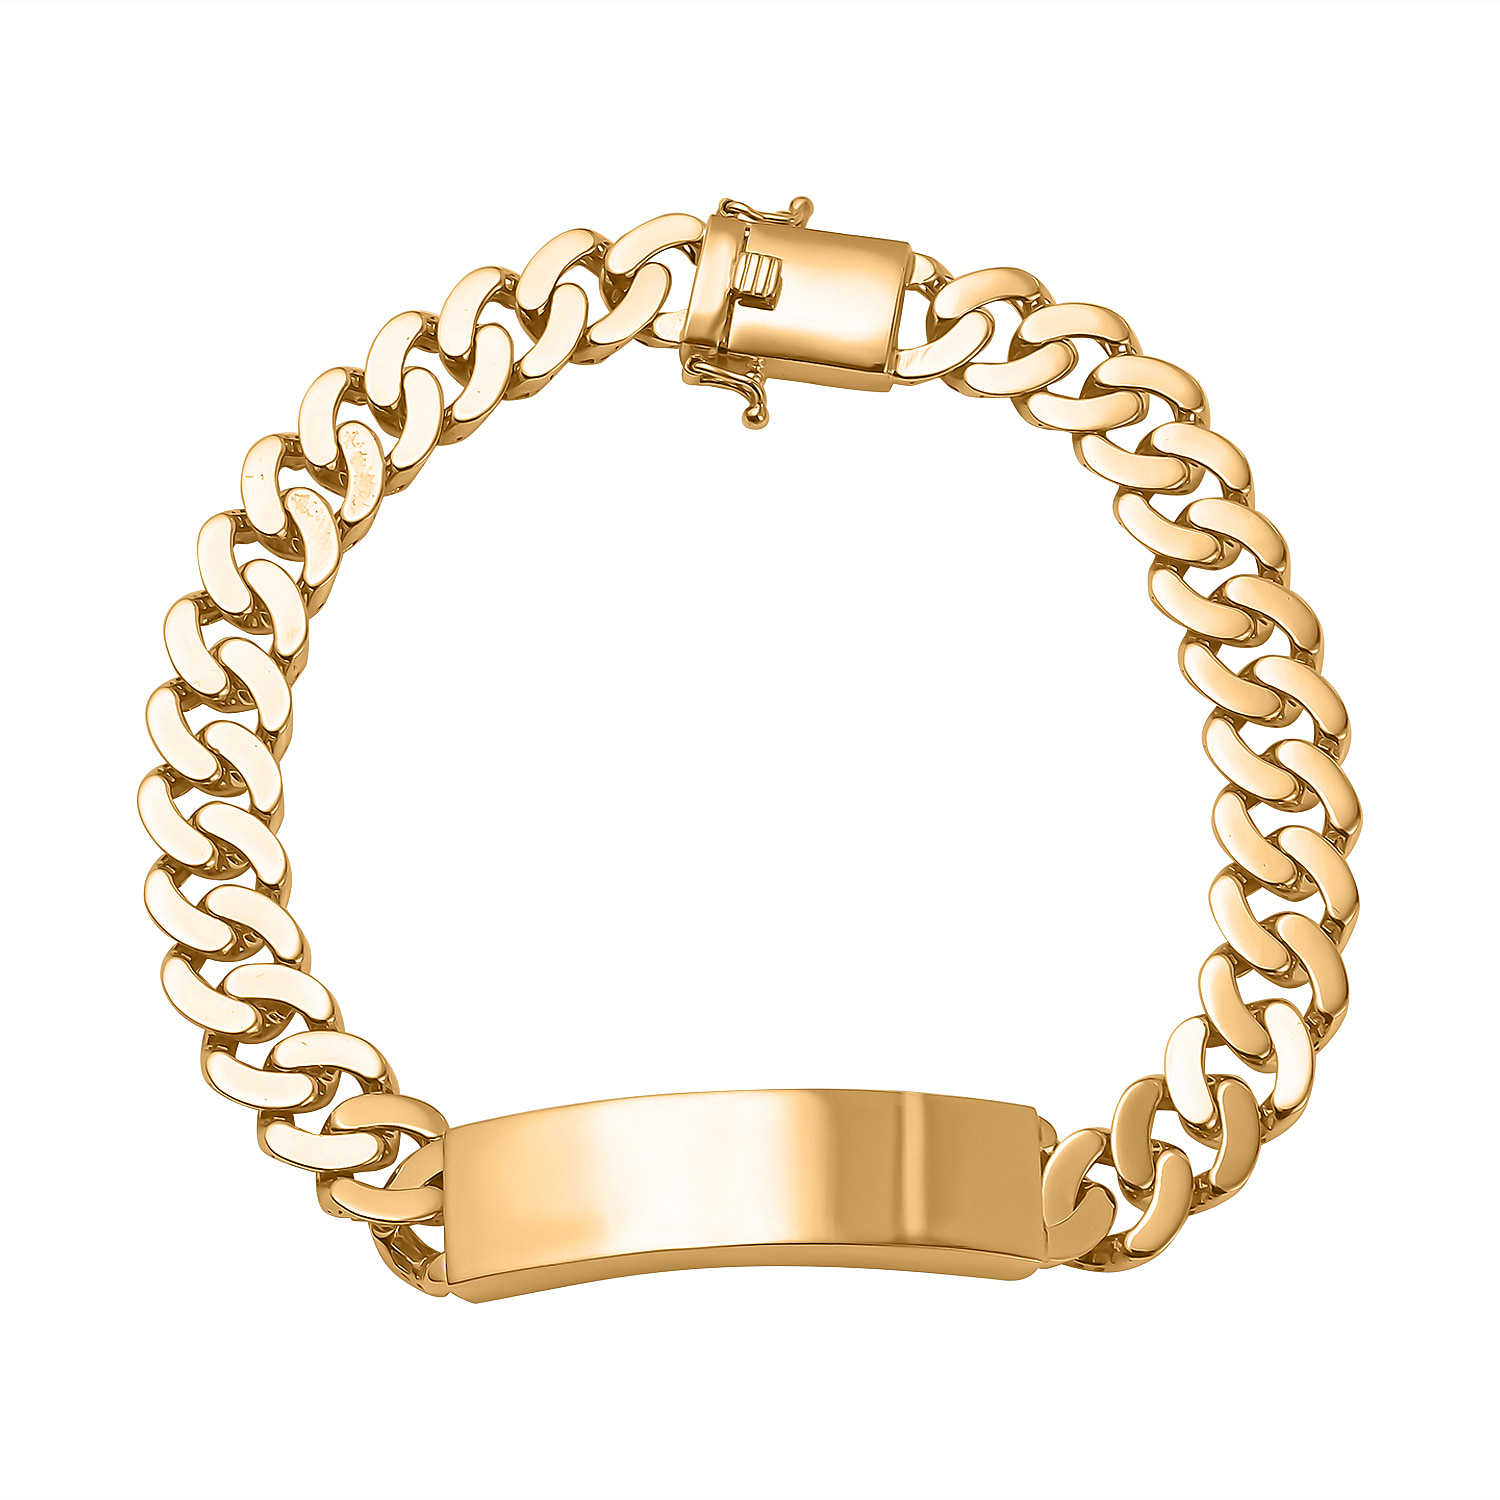 Preview Milan Closeout - 9K Yellow Gold Handcrafted Broad Curb ID Bracelet (Size - 8), Gold Wt. 16.50 Gms